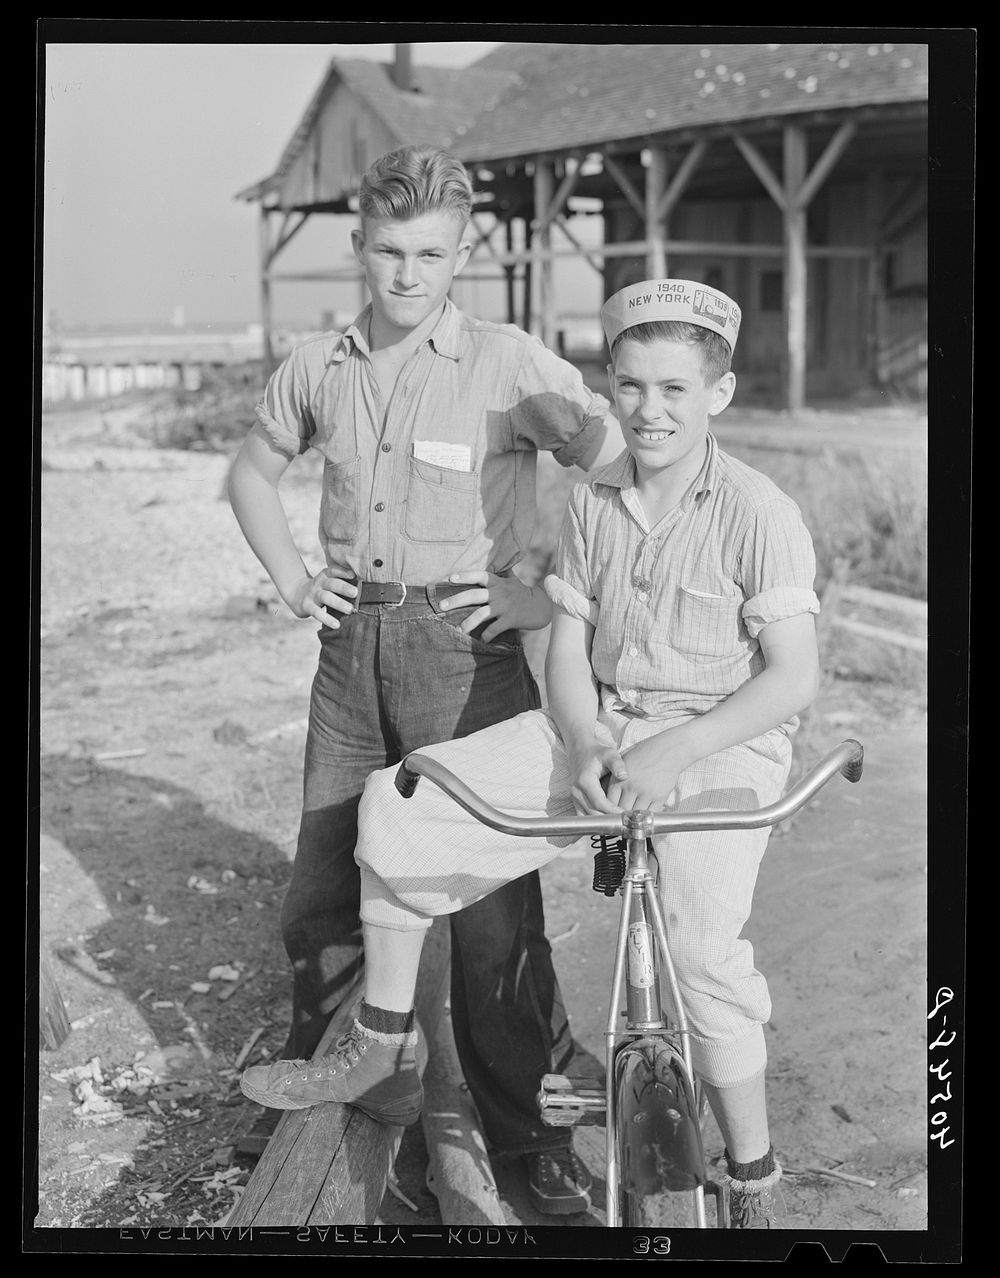 Two boys, sons of fishermen. Deal Island, Maryland. Sourced from the Library of Congress.